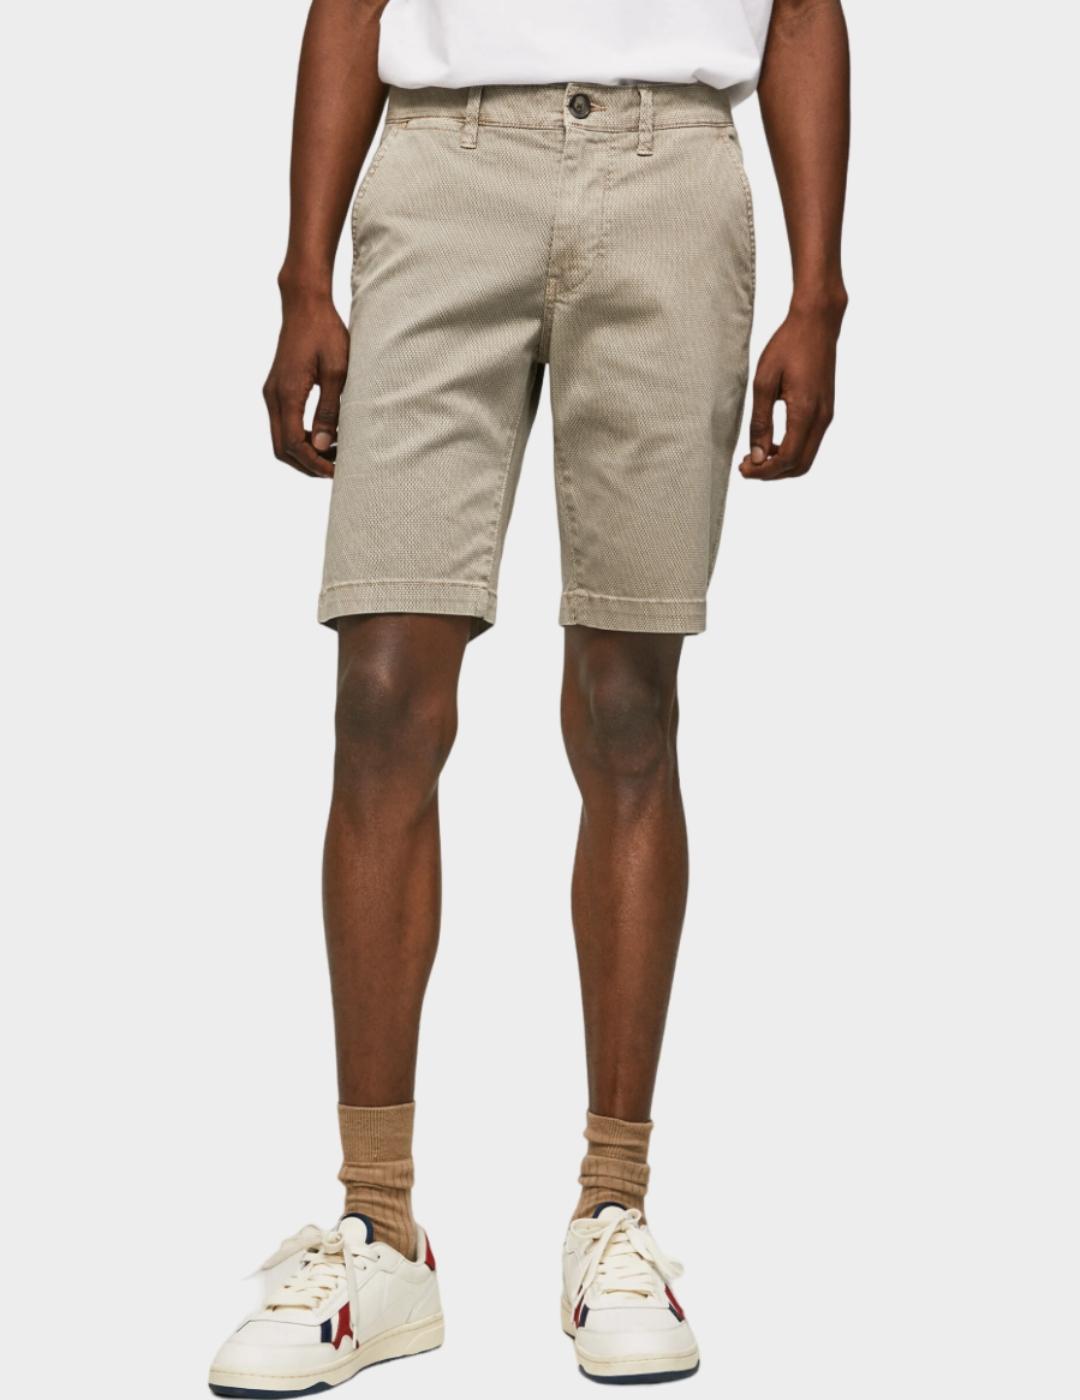 Bermuda beige chino Charly short fit slim hombre pepe jeans